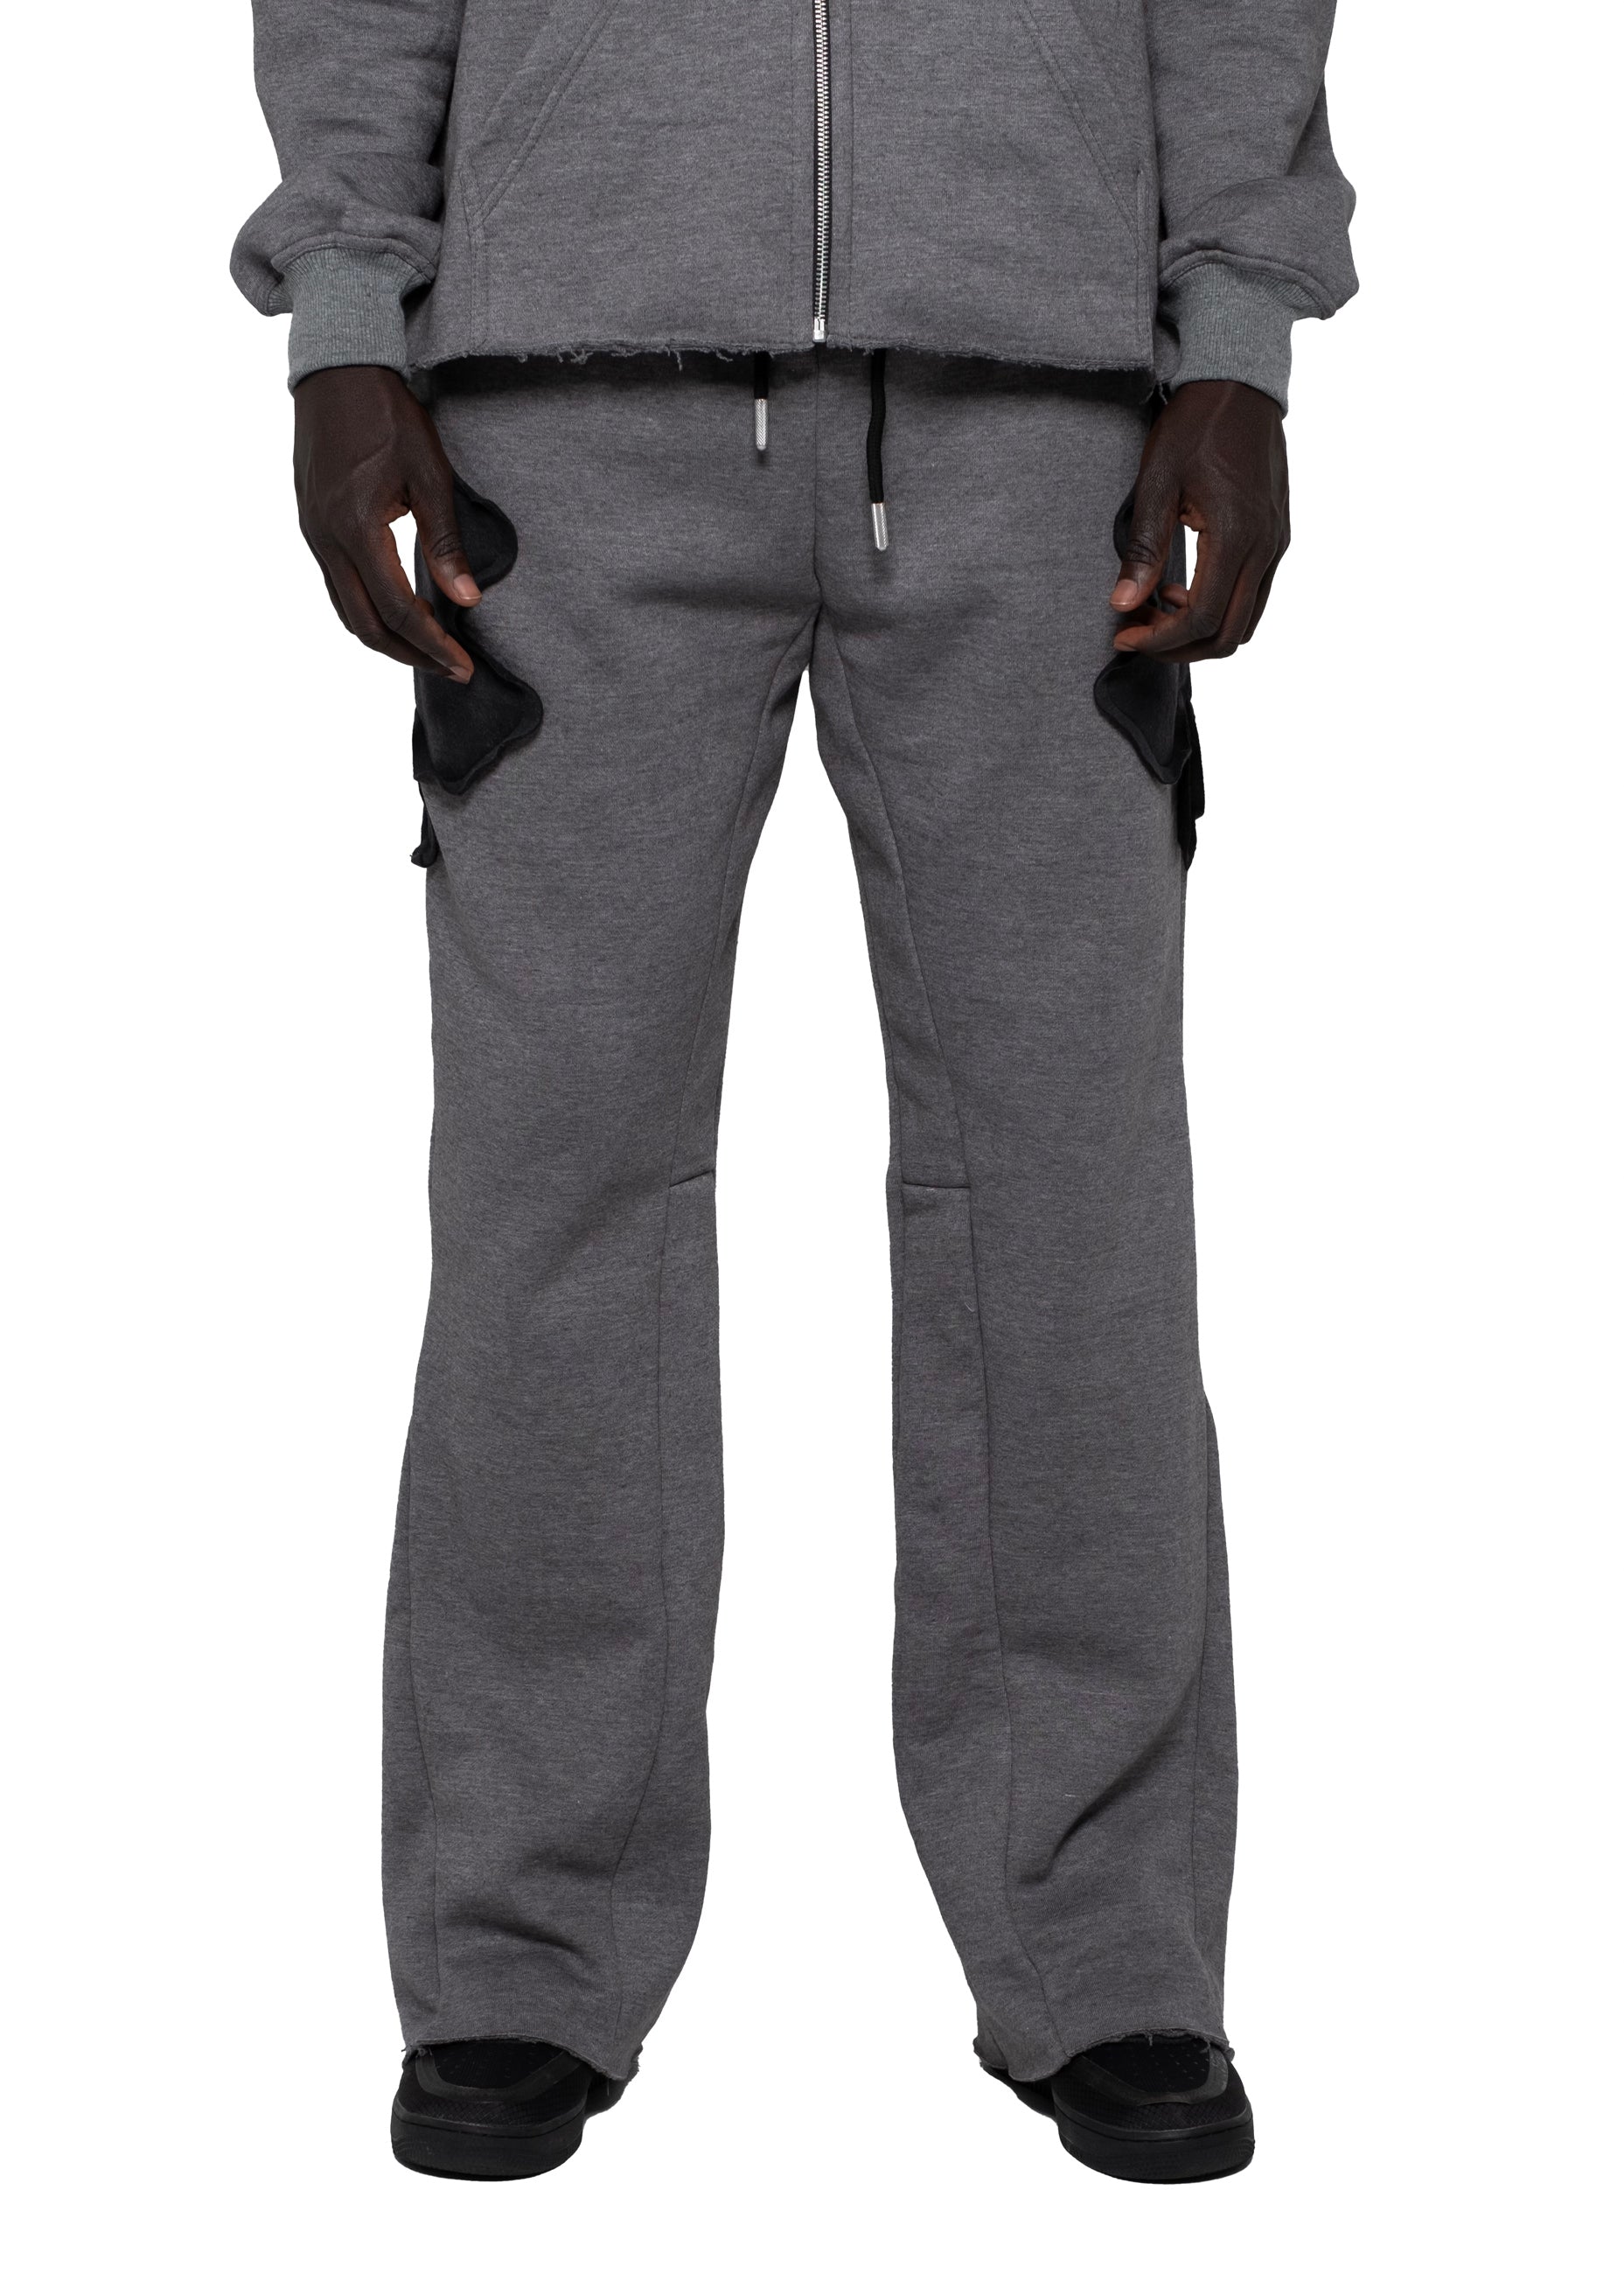 Stitched Clover Sweatpants Heathered Gray